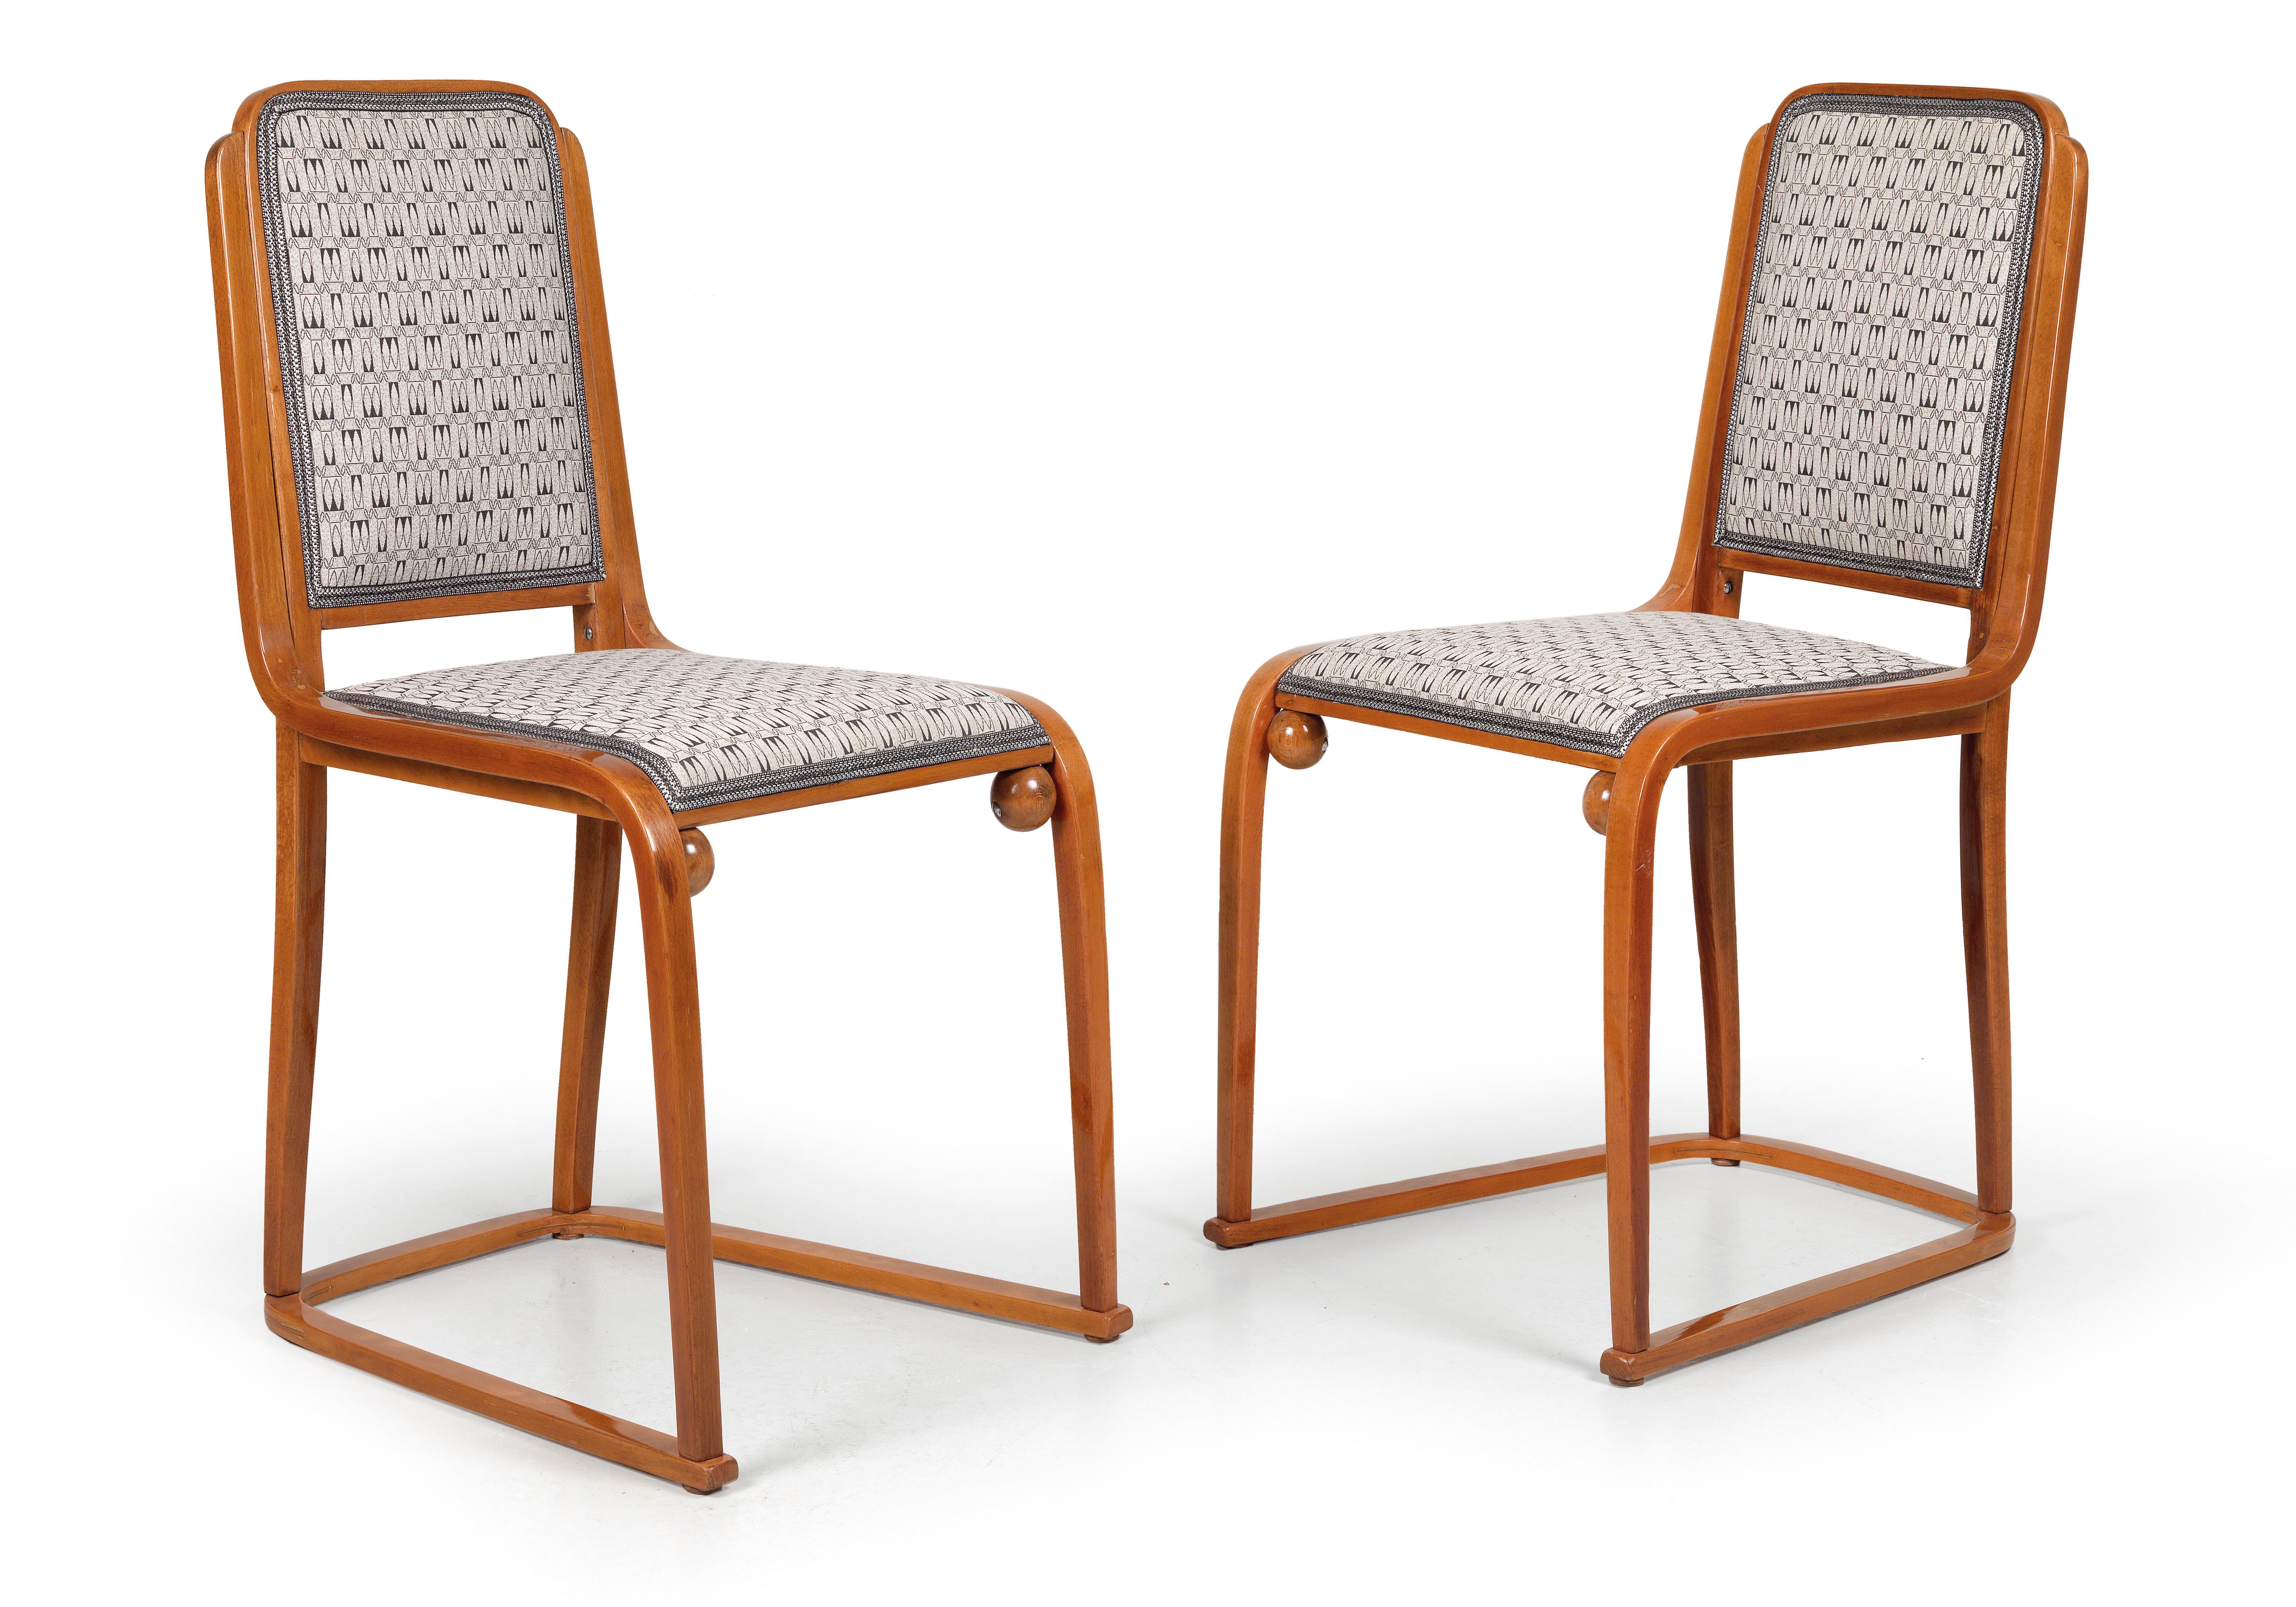 Hand-Crafted Originals 1905 of the Period Pair of Josef Hoffmann and Jacob &Josef Kohn Chairs For Sale